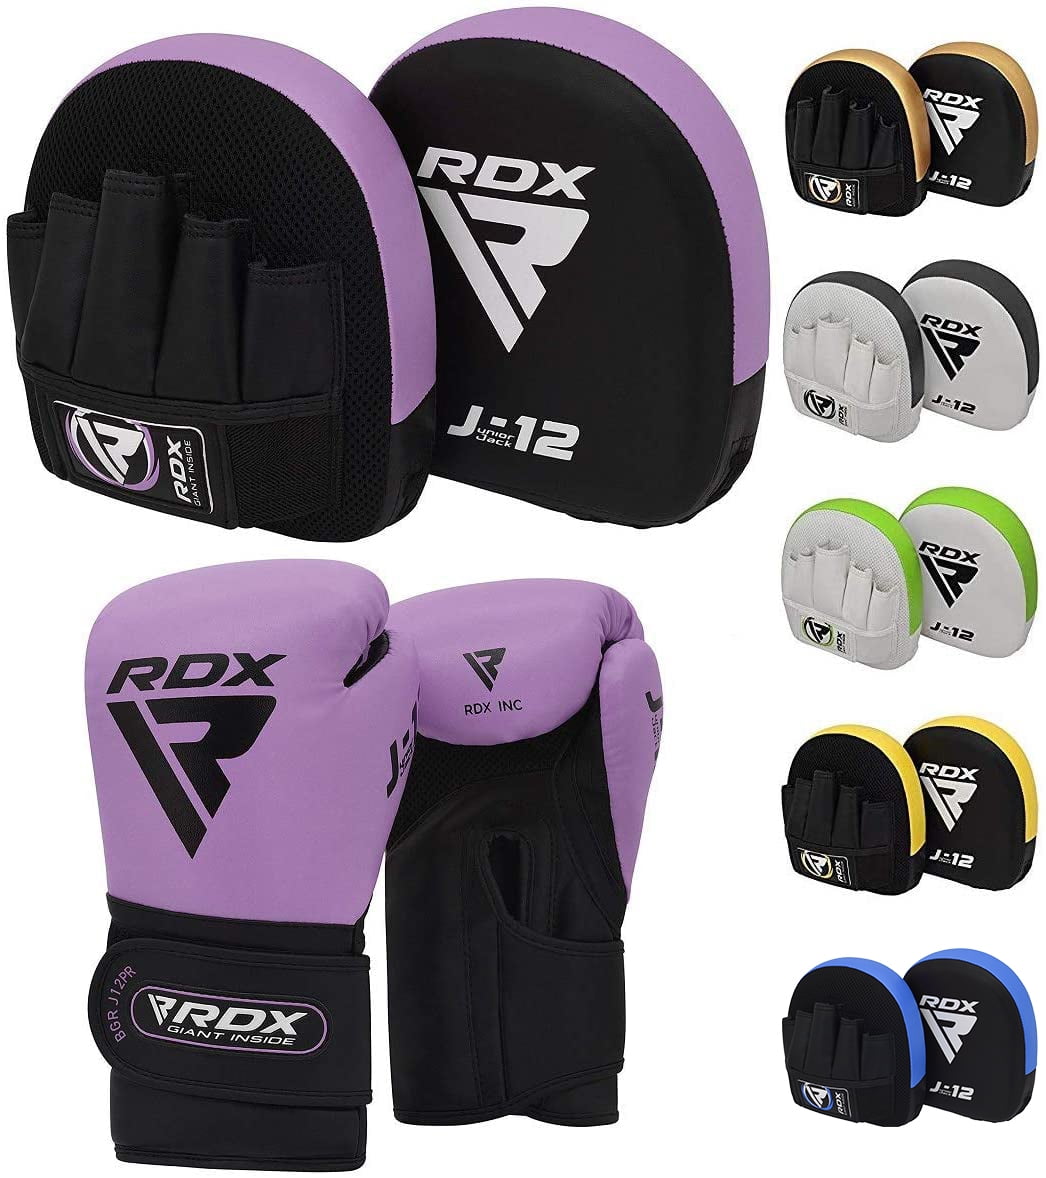 RDX Focus Pads Hook and Jab Boxing Mitts Punch MMA Kickboxing Target Punching US for sale online 